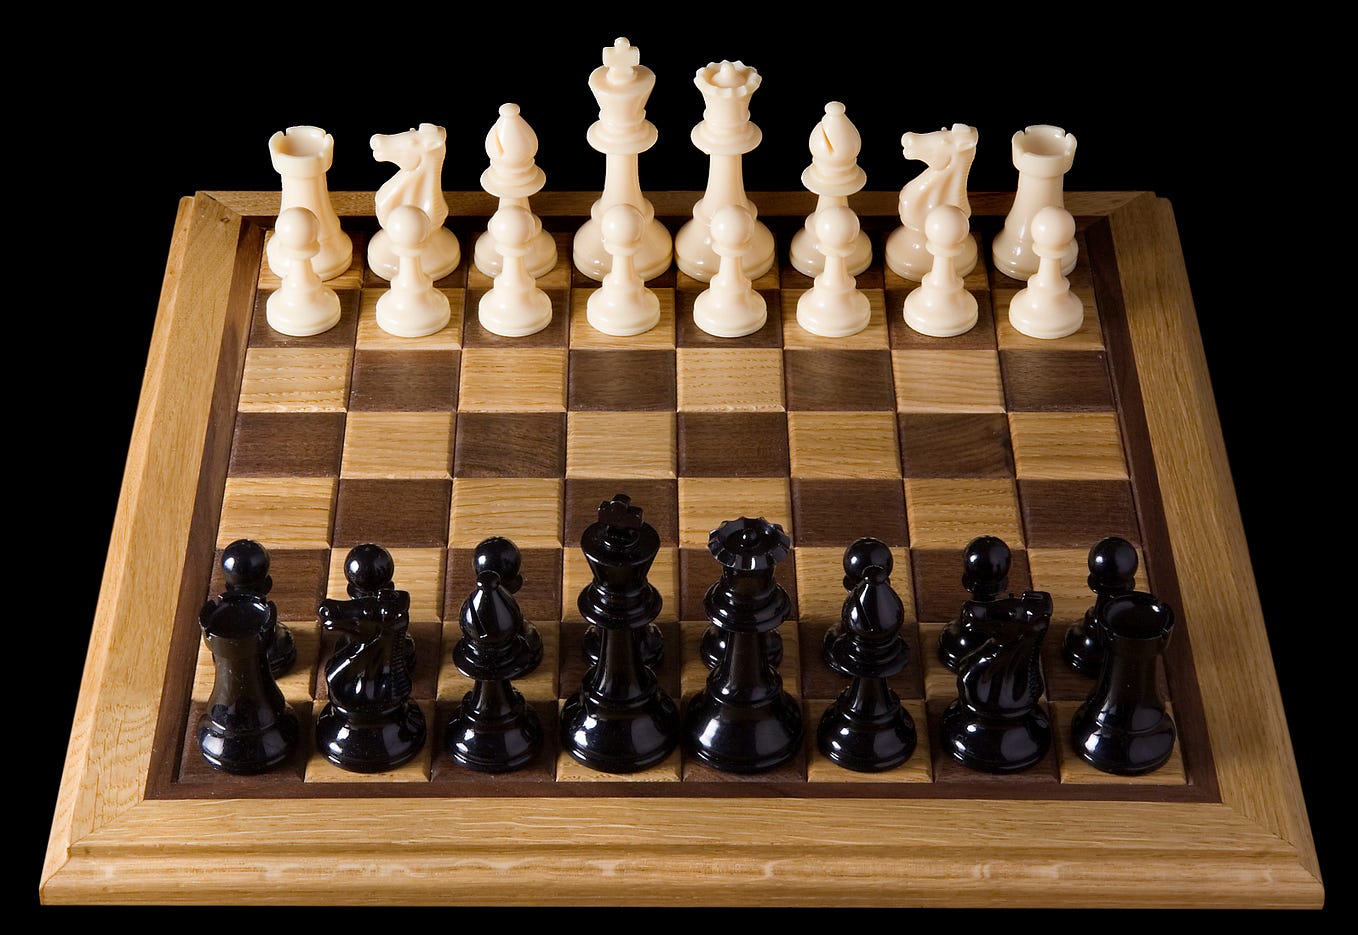 How a myth about the endgame in chess seduced Avengers, Game of